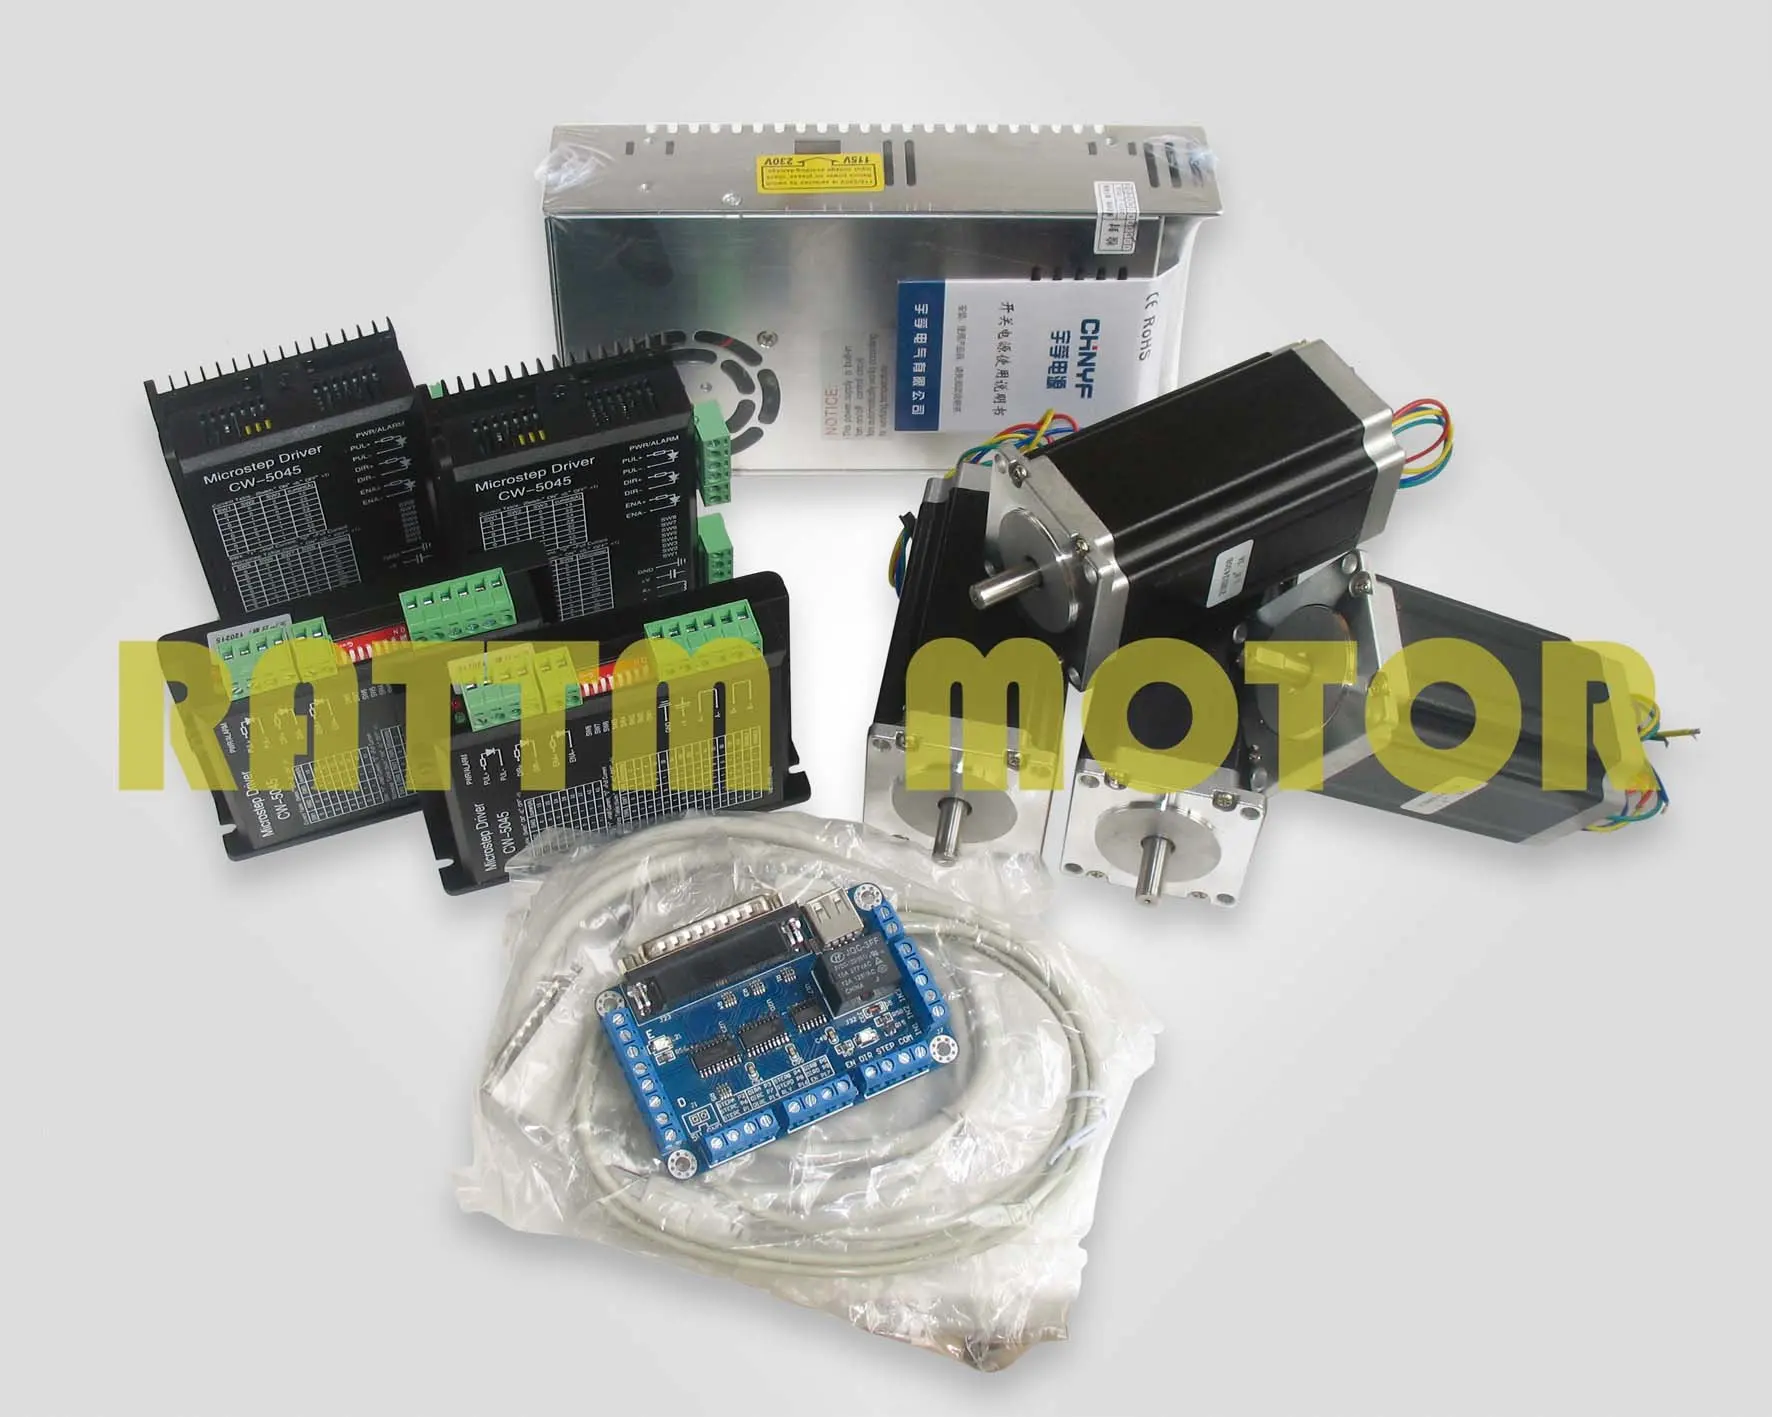 DE Delivery! 4 axis CNC NEMA23 425 oz-in Dual shaft stepper motor&256 microstep driver kit